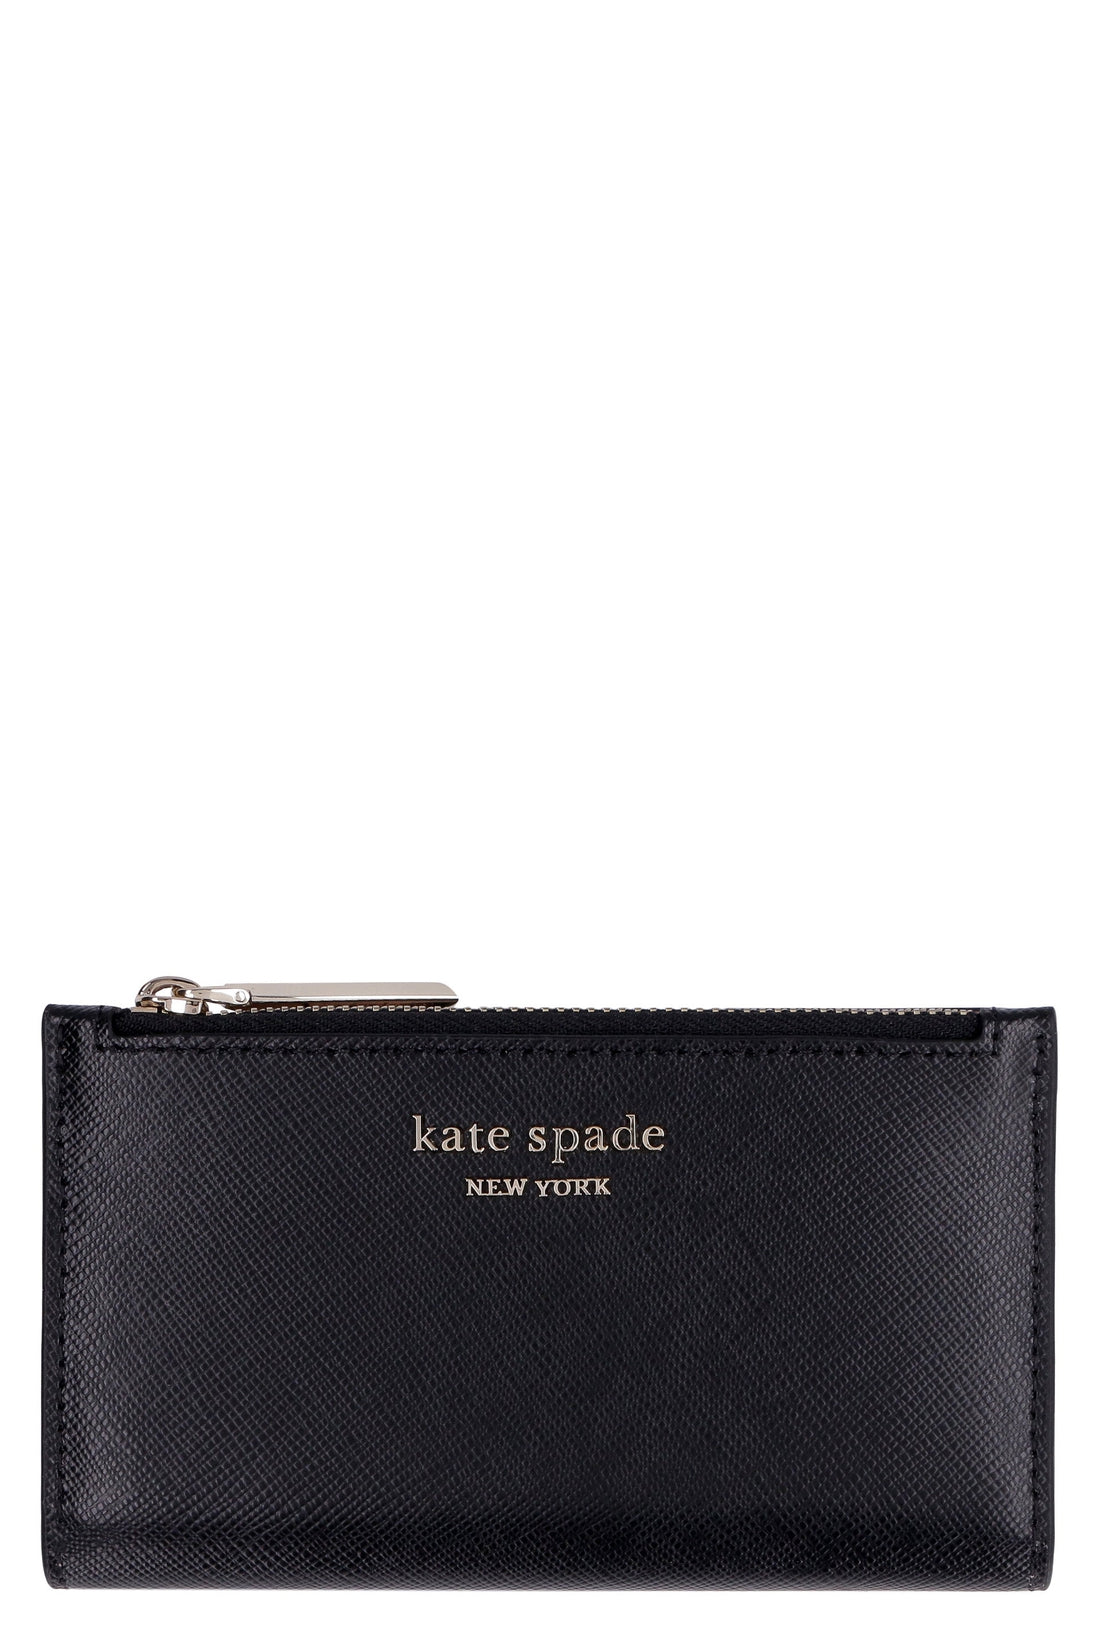 Kate Spade New York-OUTLET-SALE-Spencer Saffiano leather small wallet-ARCHIVIST